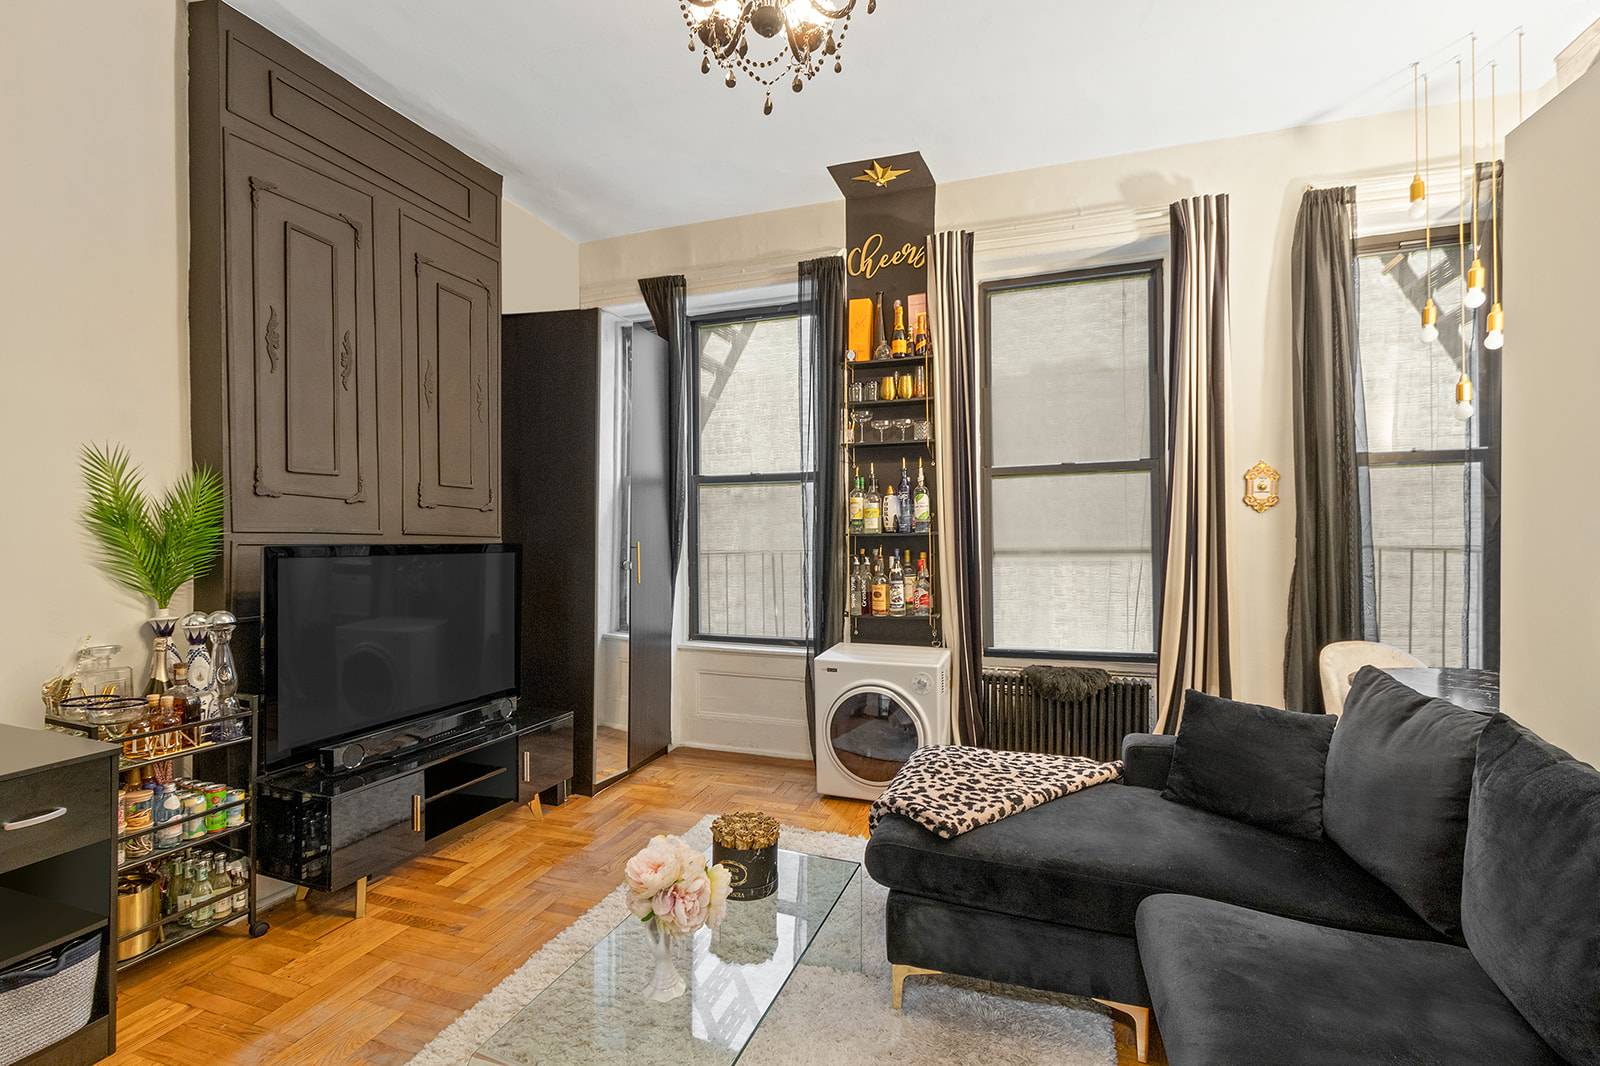 QUIET AND CHARMING ONE BEDROOM APARTMENT IN HEART OF HELLS KITCHEN